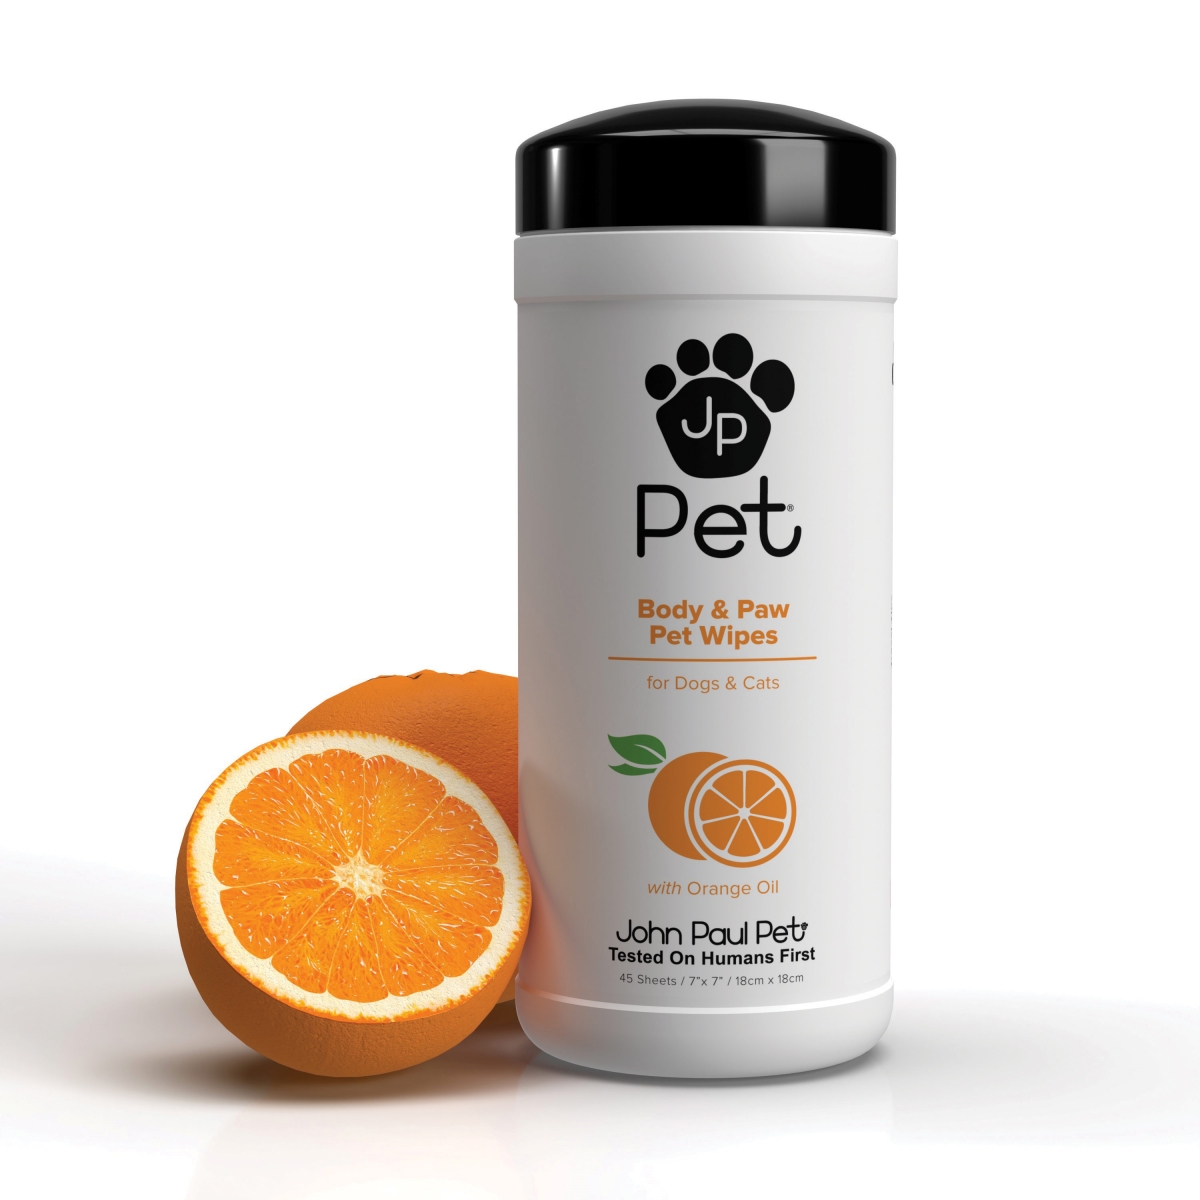 Body and Paw Wipes by John Paul Pet